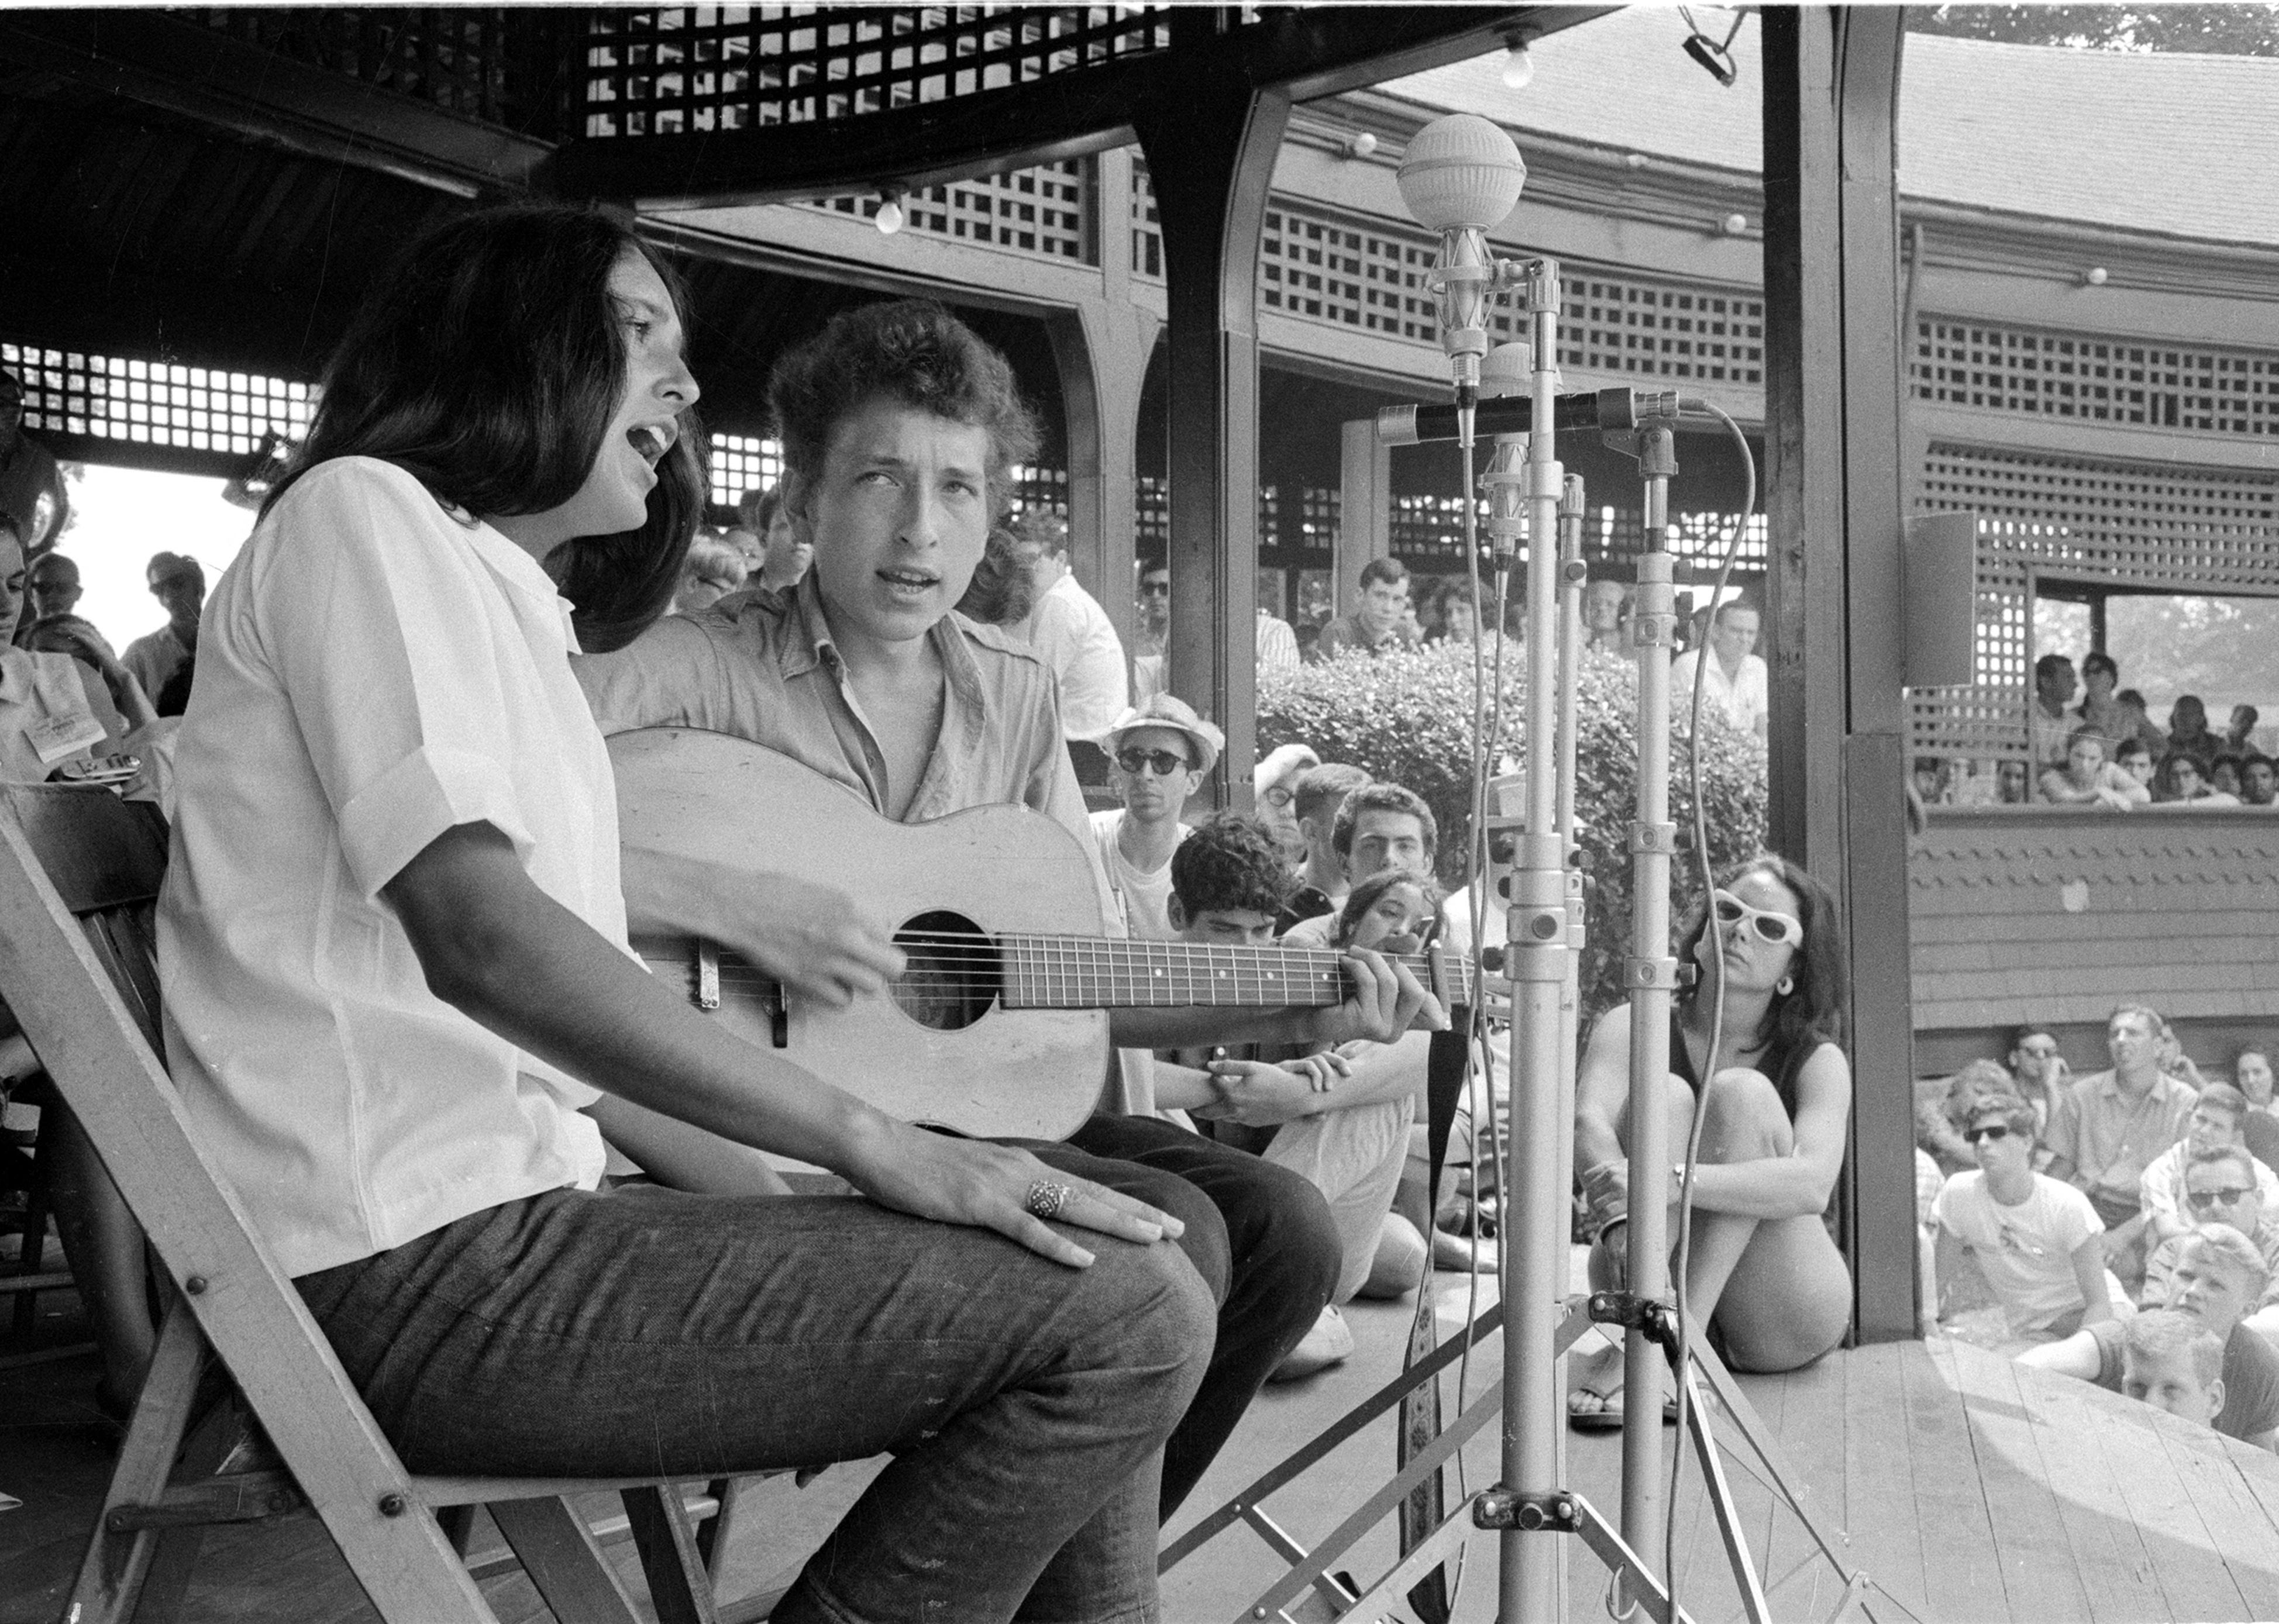 Joan Baez and Bob Dylan on stage during a duet at the Newport Folk Festival.